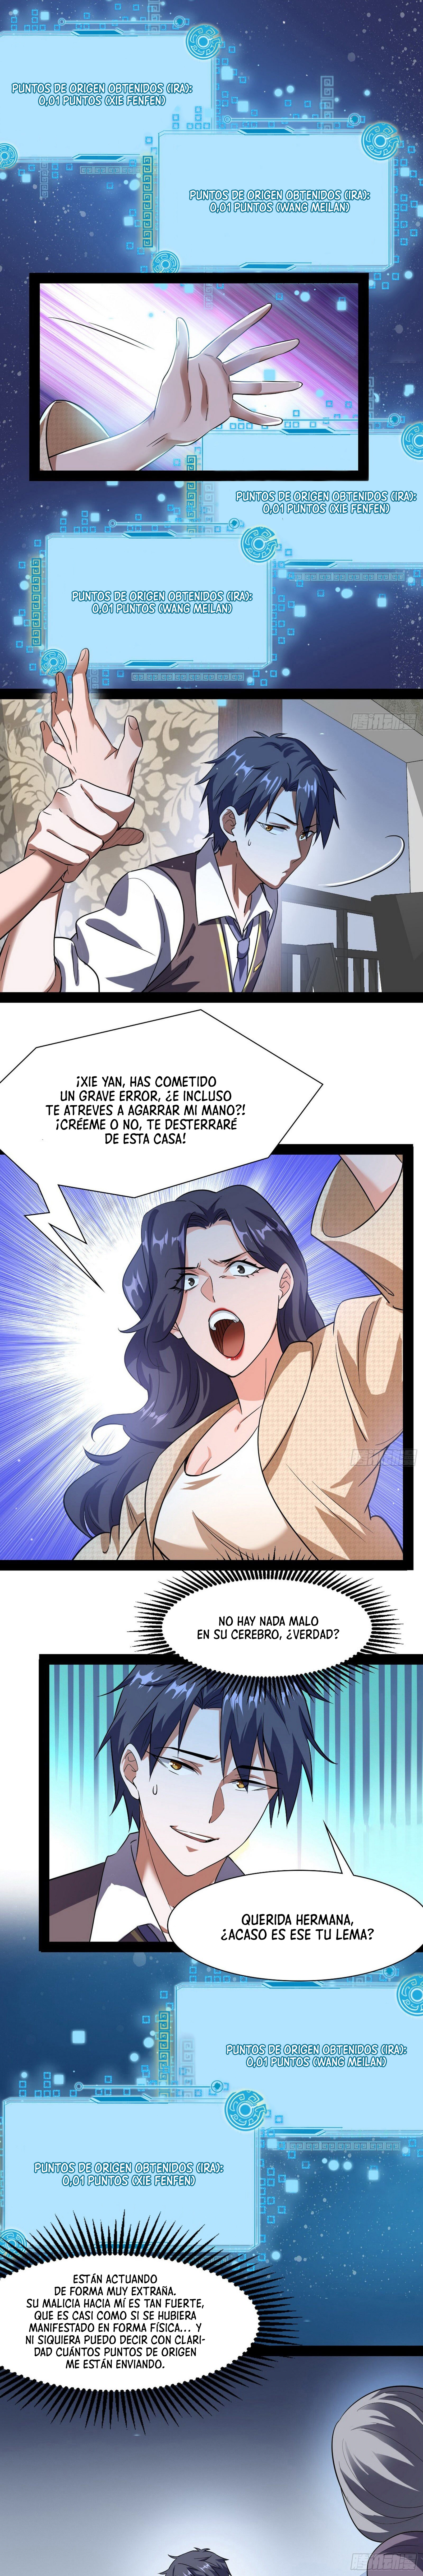 Manga Soy un dios maligno Chapter 94 image number 7